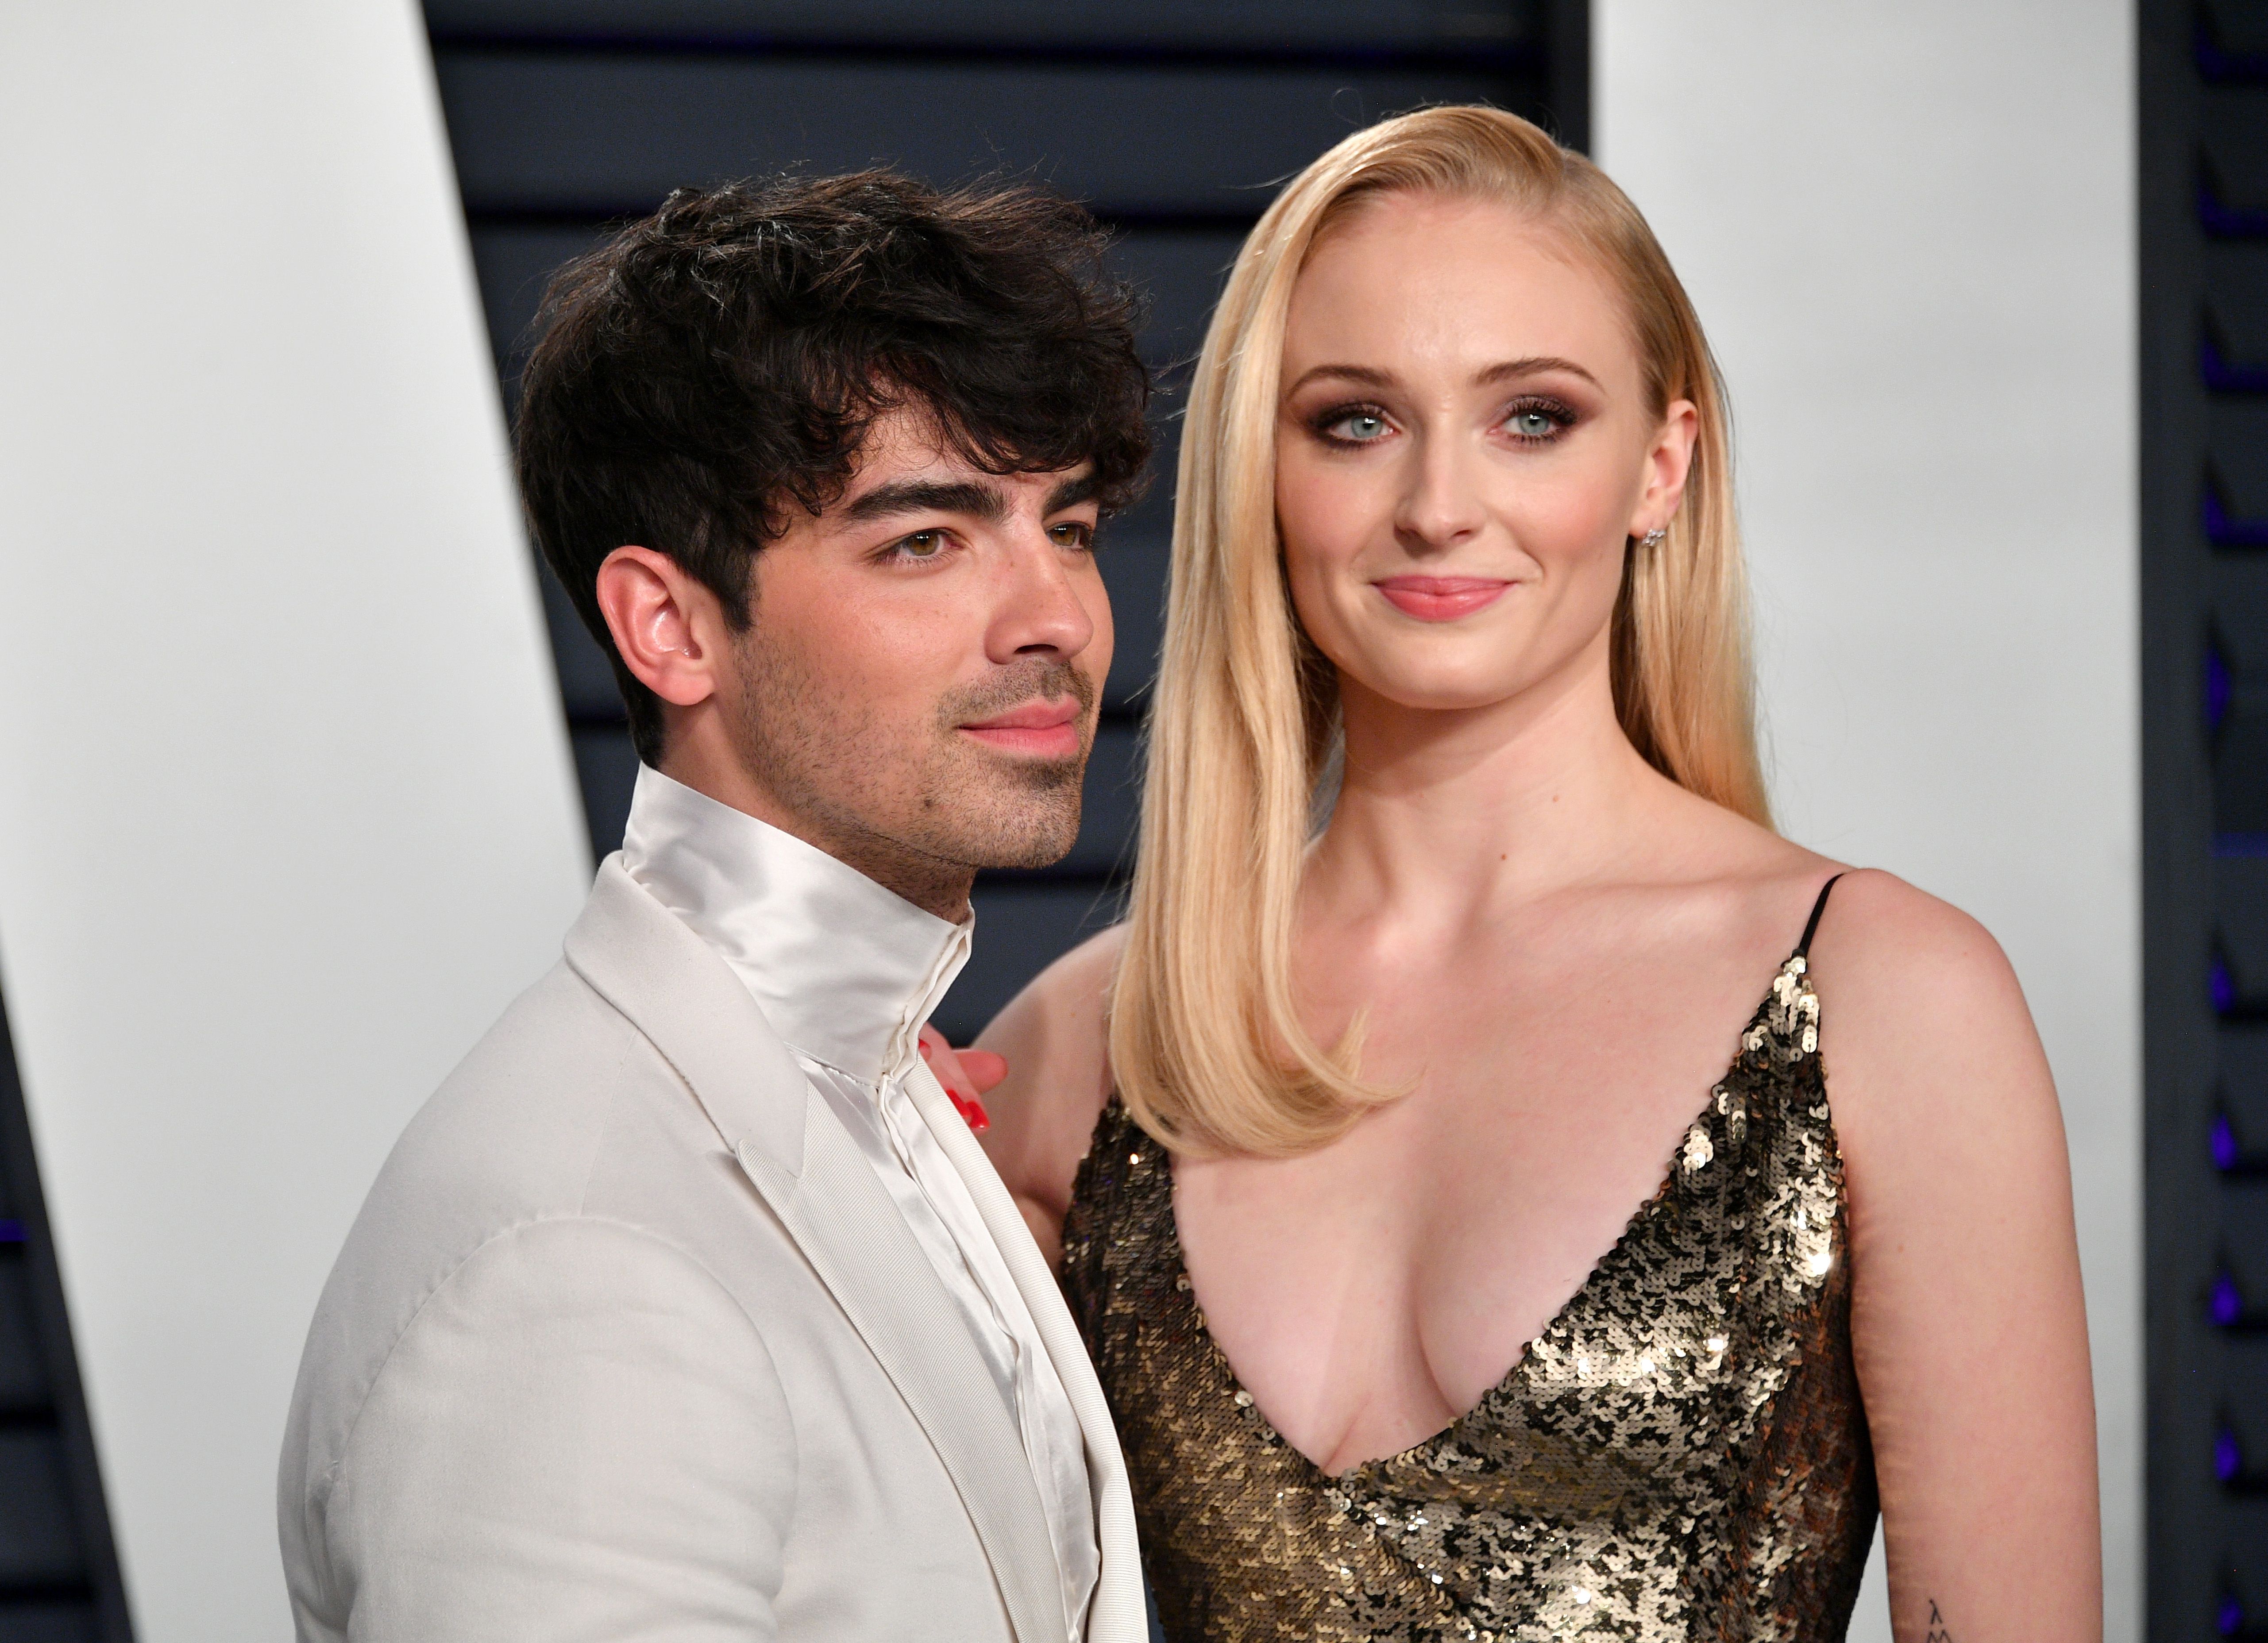 Joe Jonas and Sophie Turner during the 2019 Vanity Fair Oscar Party at Wallis Annenberg Center for the Performing Arts on February 24, 2019 in Beverly Hills, California. | Source: Getty Images